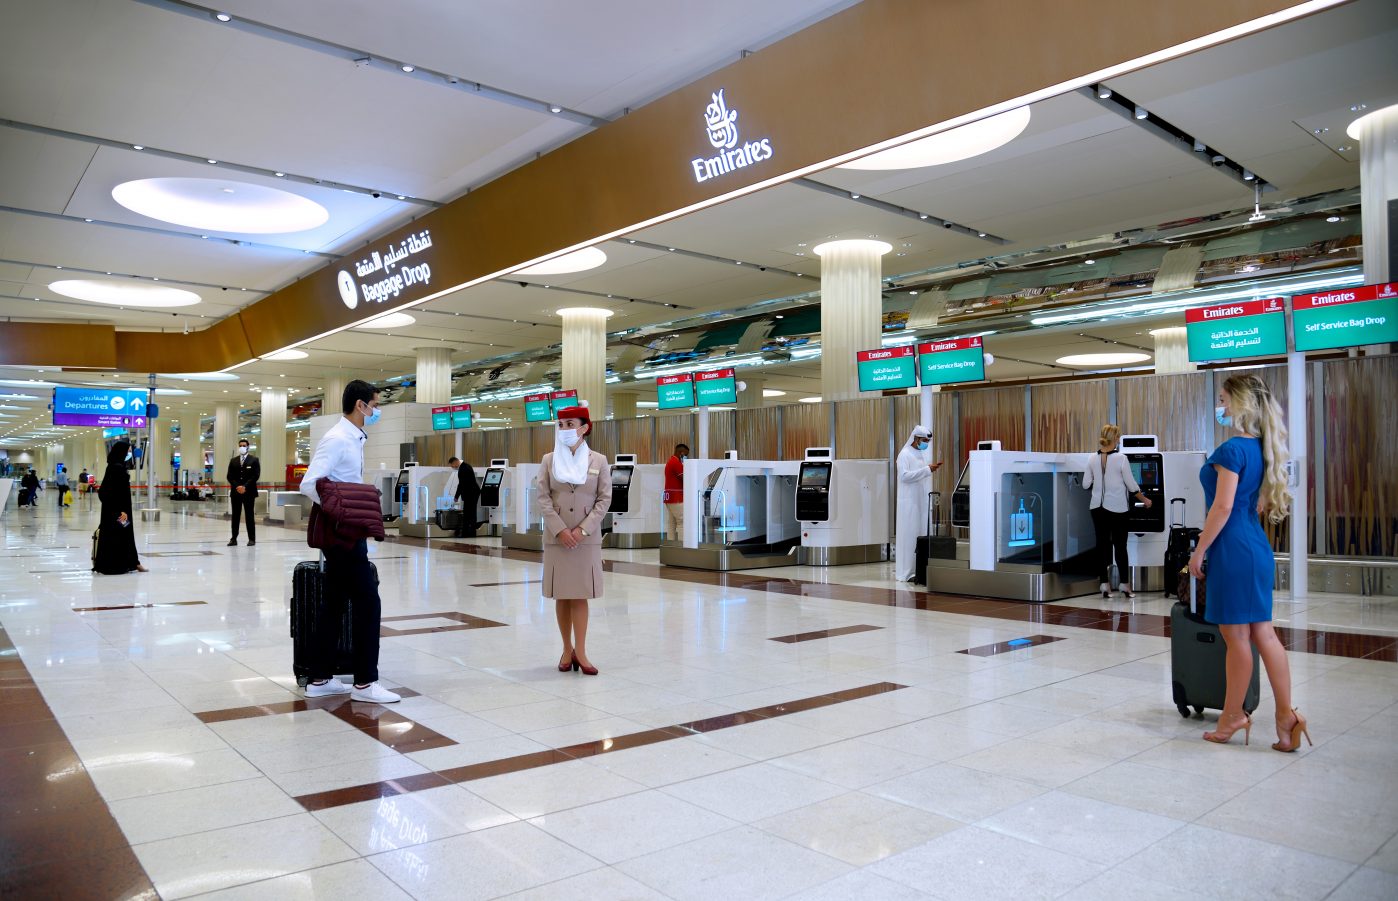 Emirates has introduced a 'Travel Pass' for airlines requiring covid testing boost for the travel industry 2021 and s self –check in and bag drop kiosks for a more seamless airport experience at Terminal 3, Dubai International Airport.